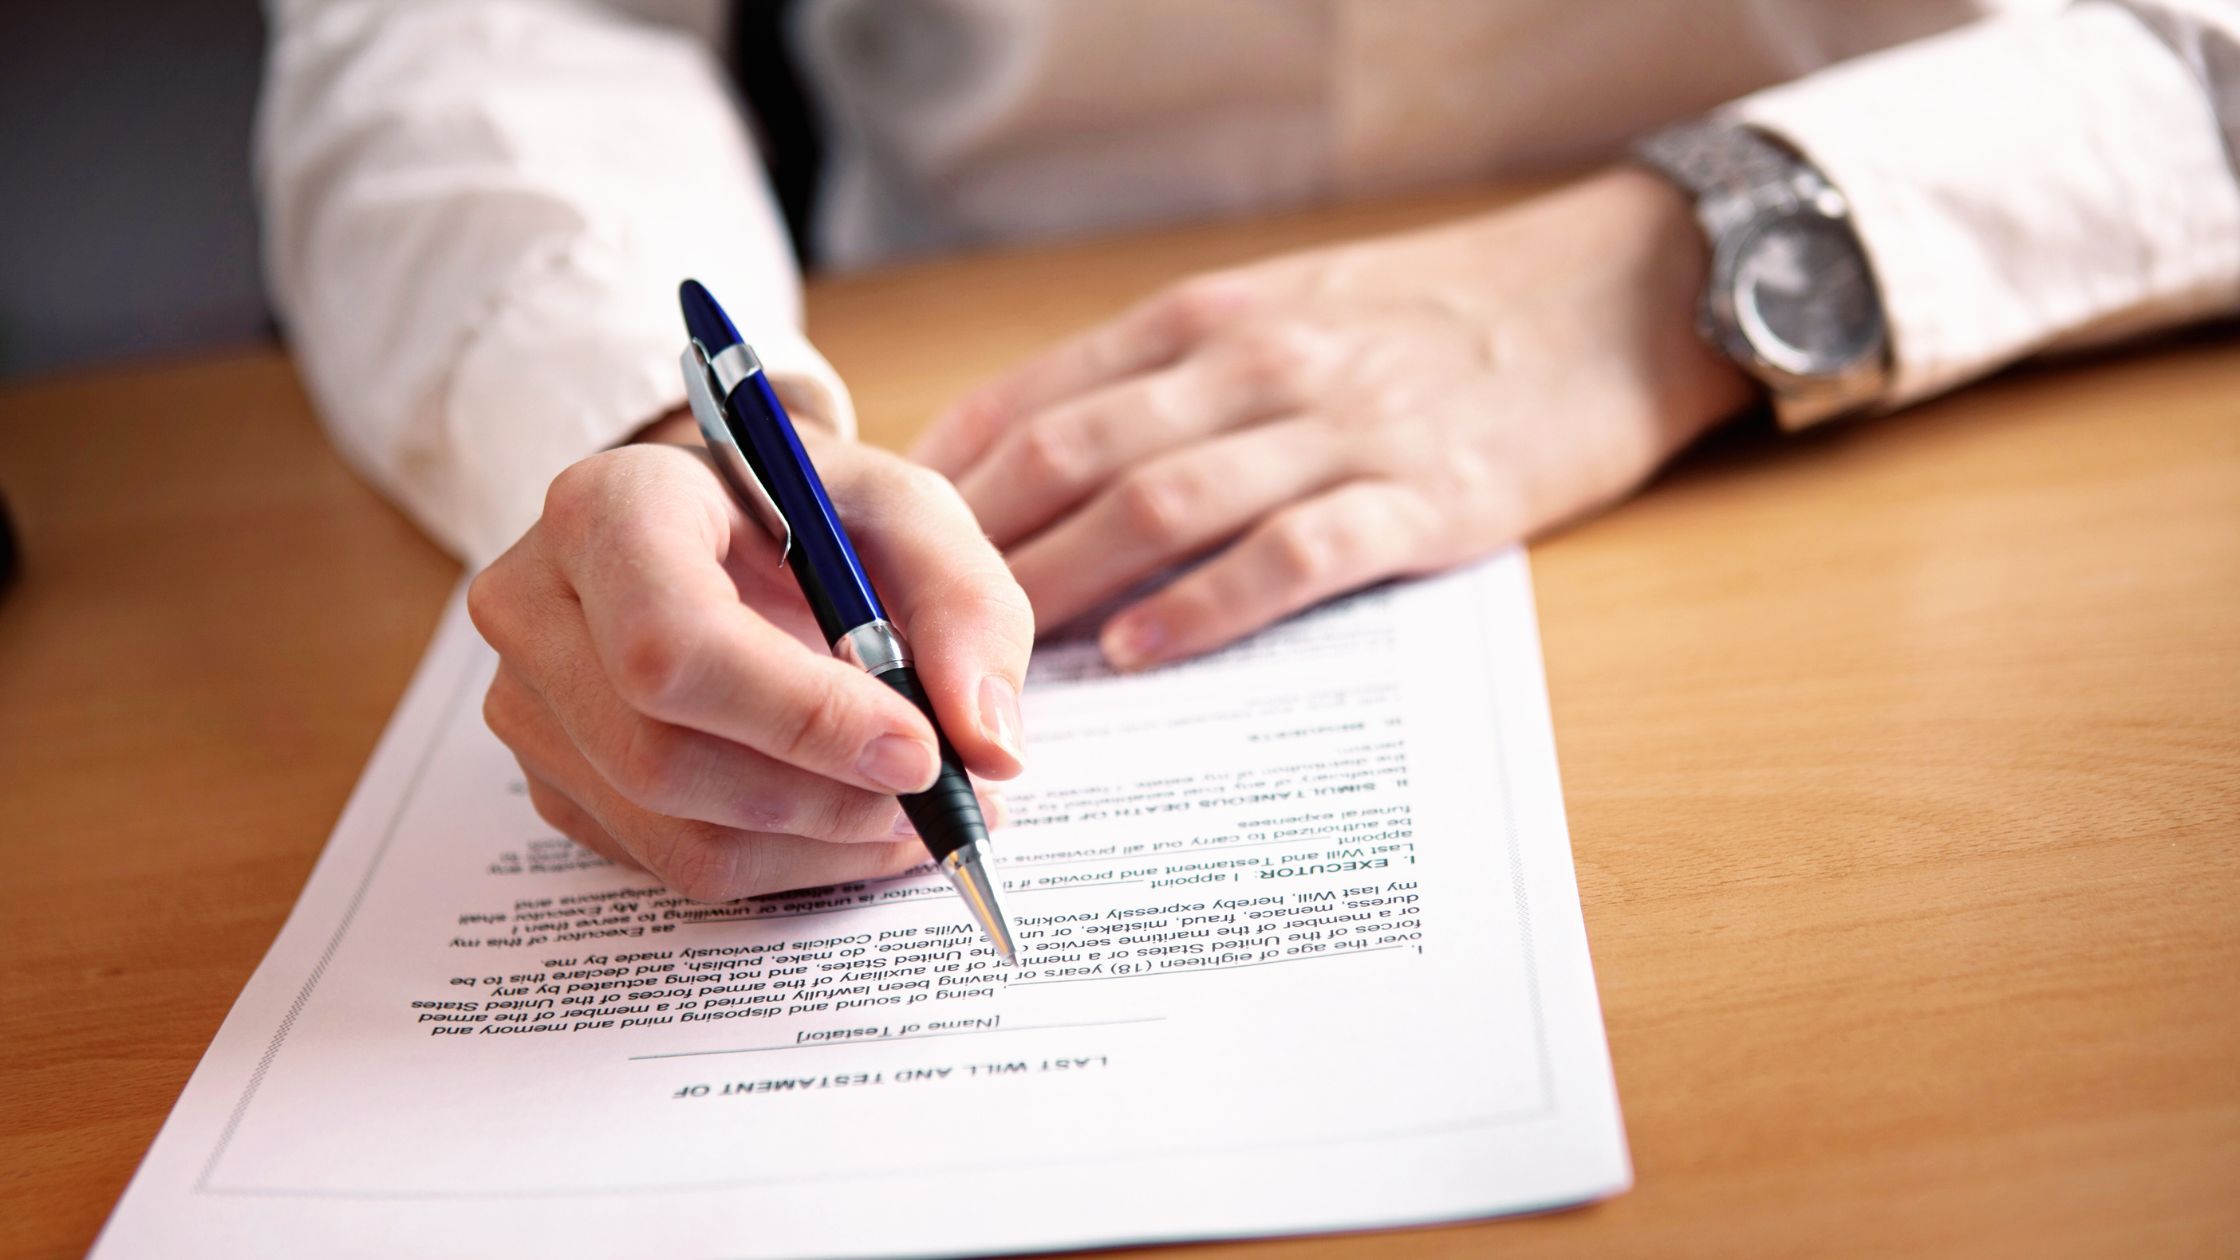 Intestacy - If I Do Not Make a Will, What Happens?